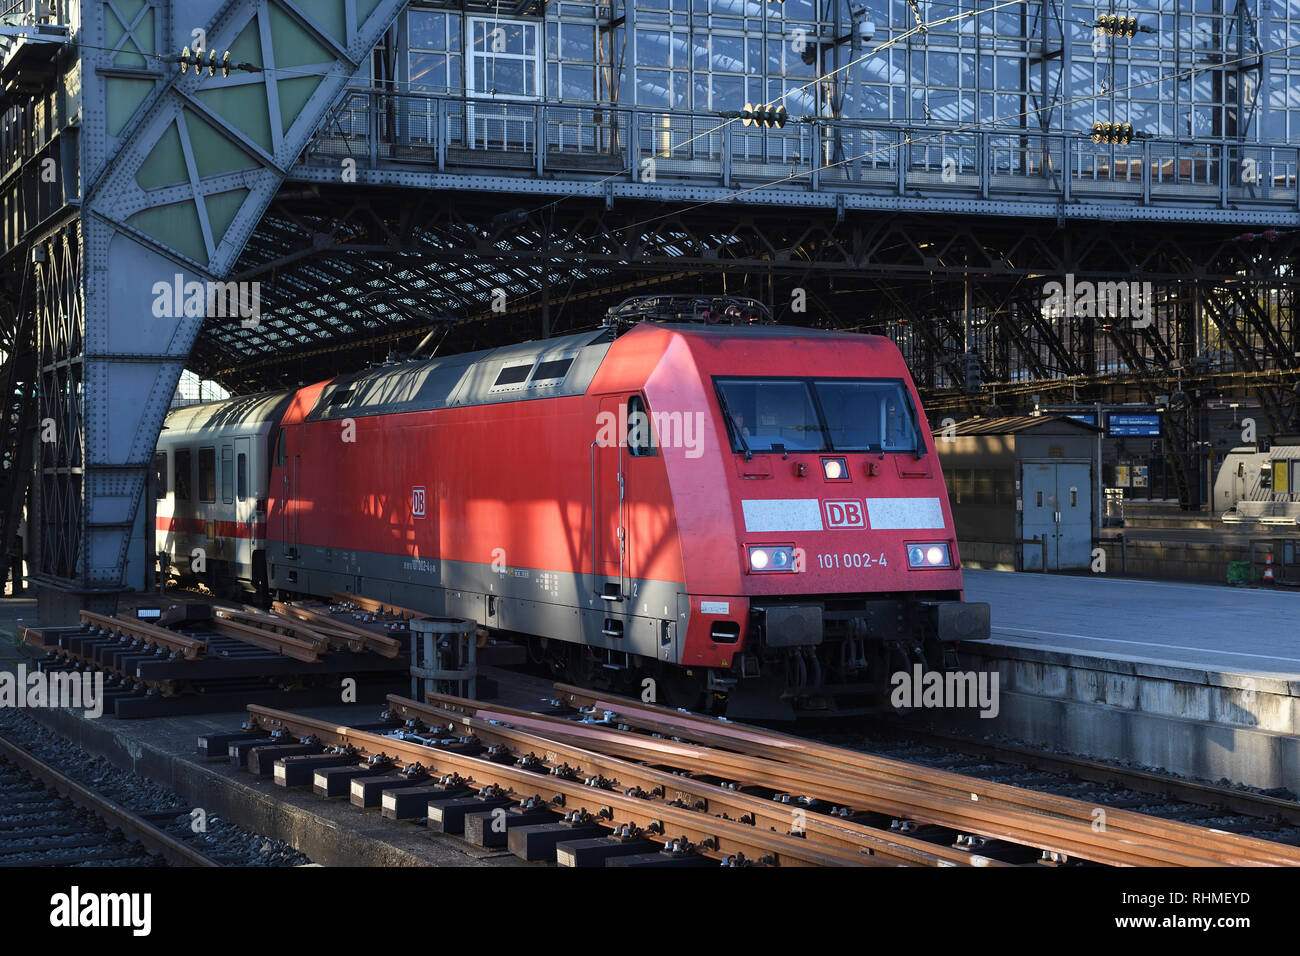 class 101;101 002-4;electric locomotive;cologne hbf;germany Stock Photo